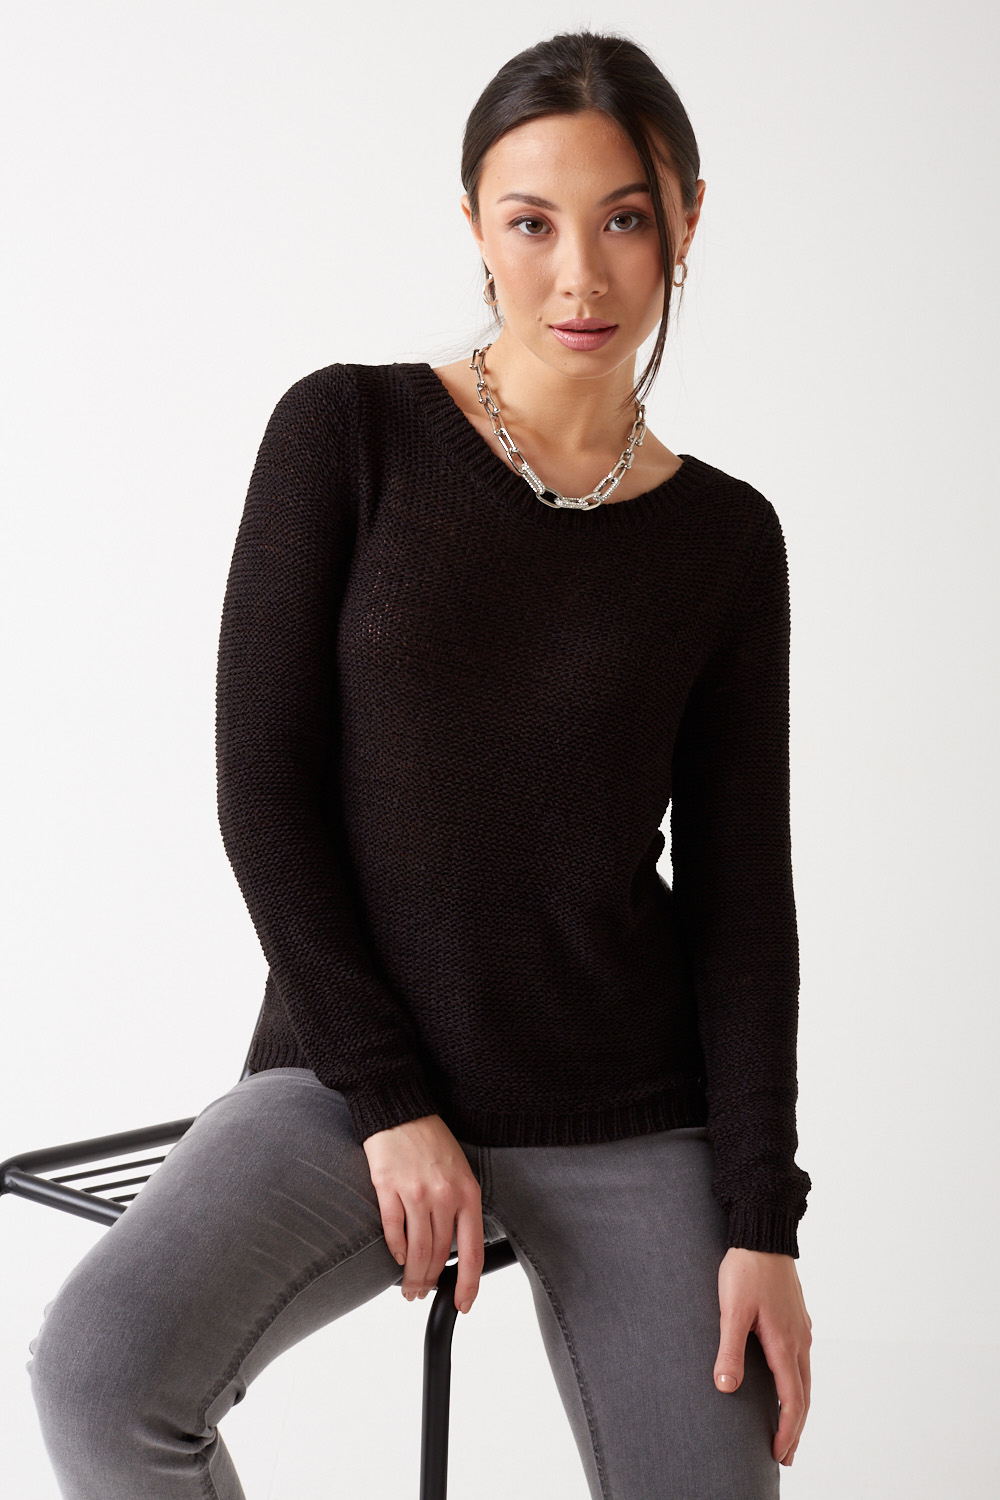 Only Geena Knit Pullover in Black | iCLOTHING - iCLOTHING